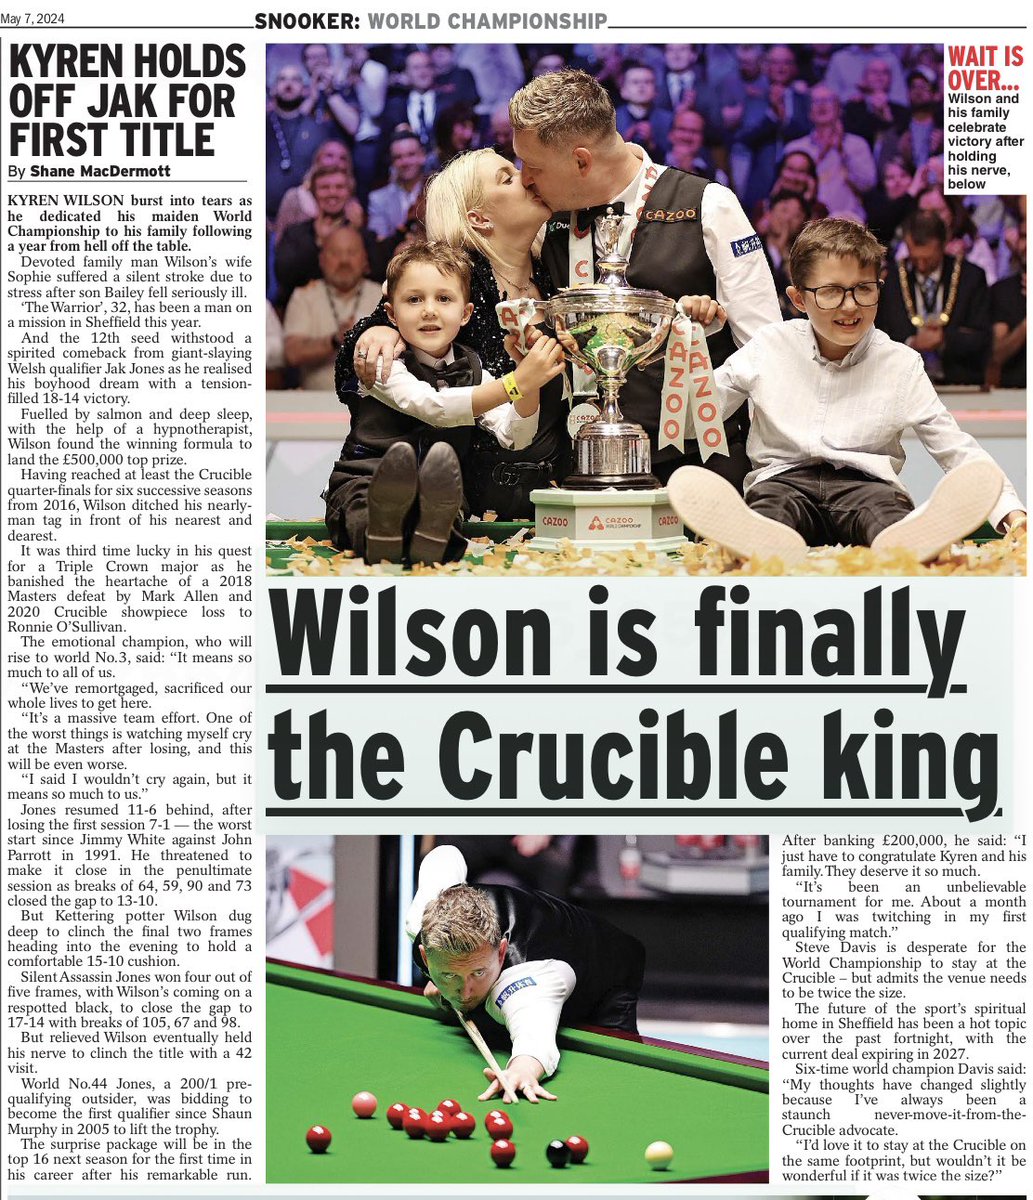 New world champion @KyrenWilson burst into tears after landing his maiden Crucible crown after a year of hell off the table @MirrorSport @MirrorSportIE @IrishMirror @DailyMirror @dailymirrorni @DailyStar_Sport @dailystar @DExpress_Sport @Daily_Express @_ShaneMacD